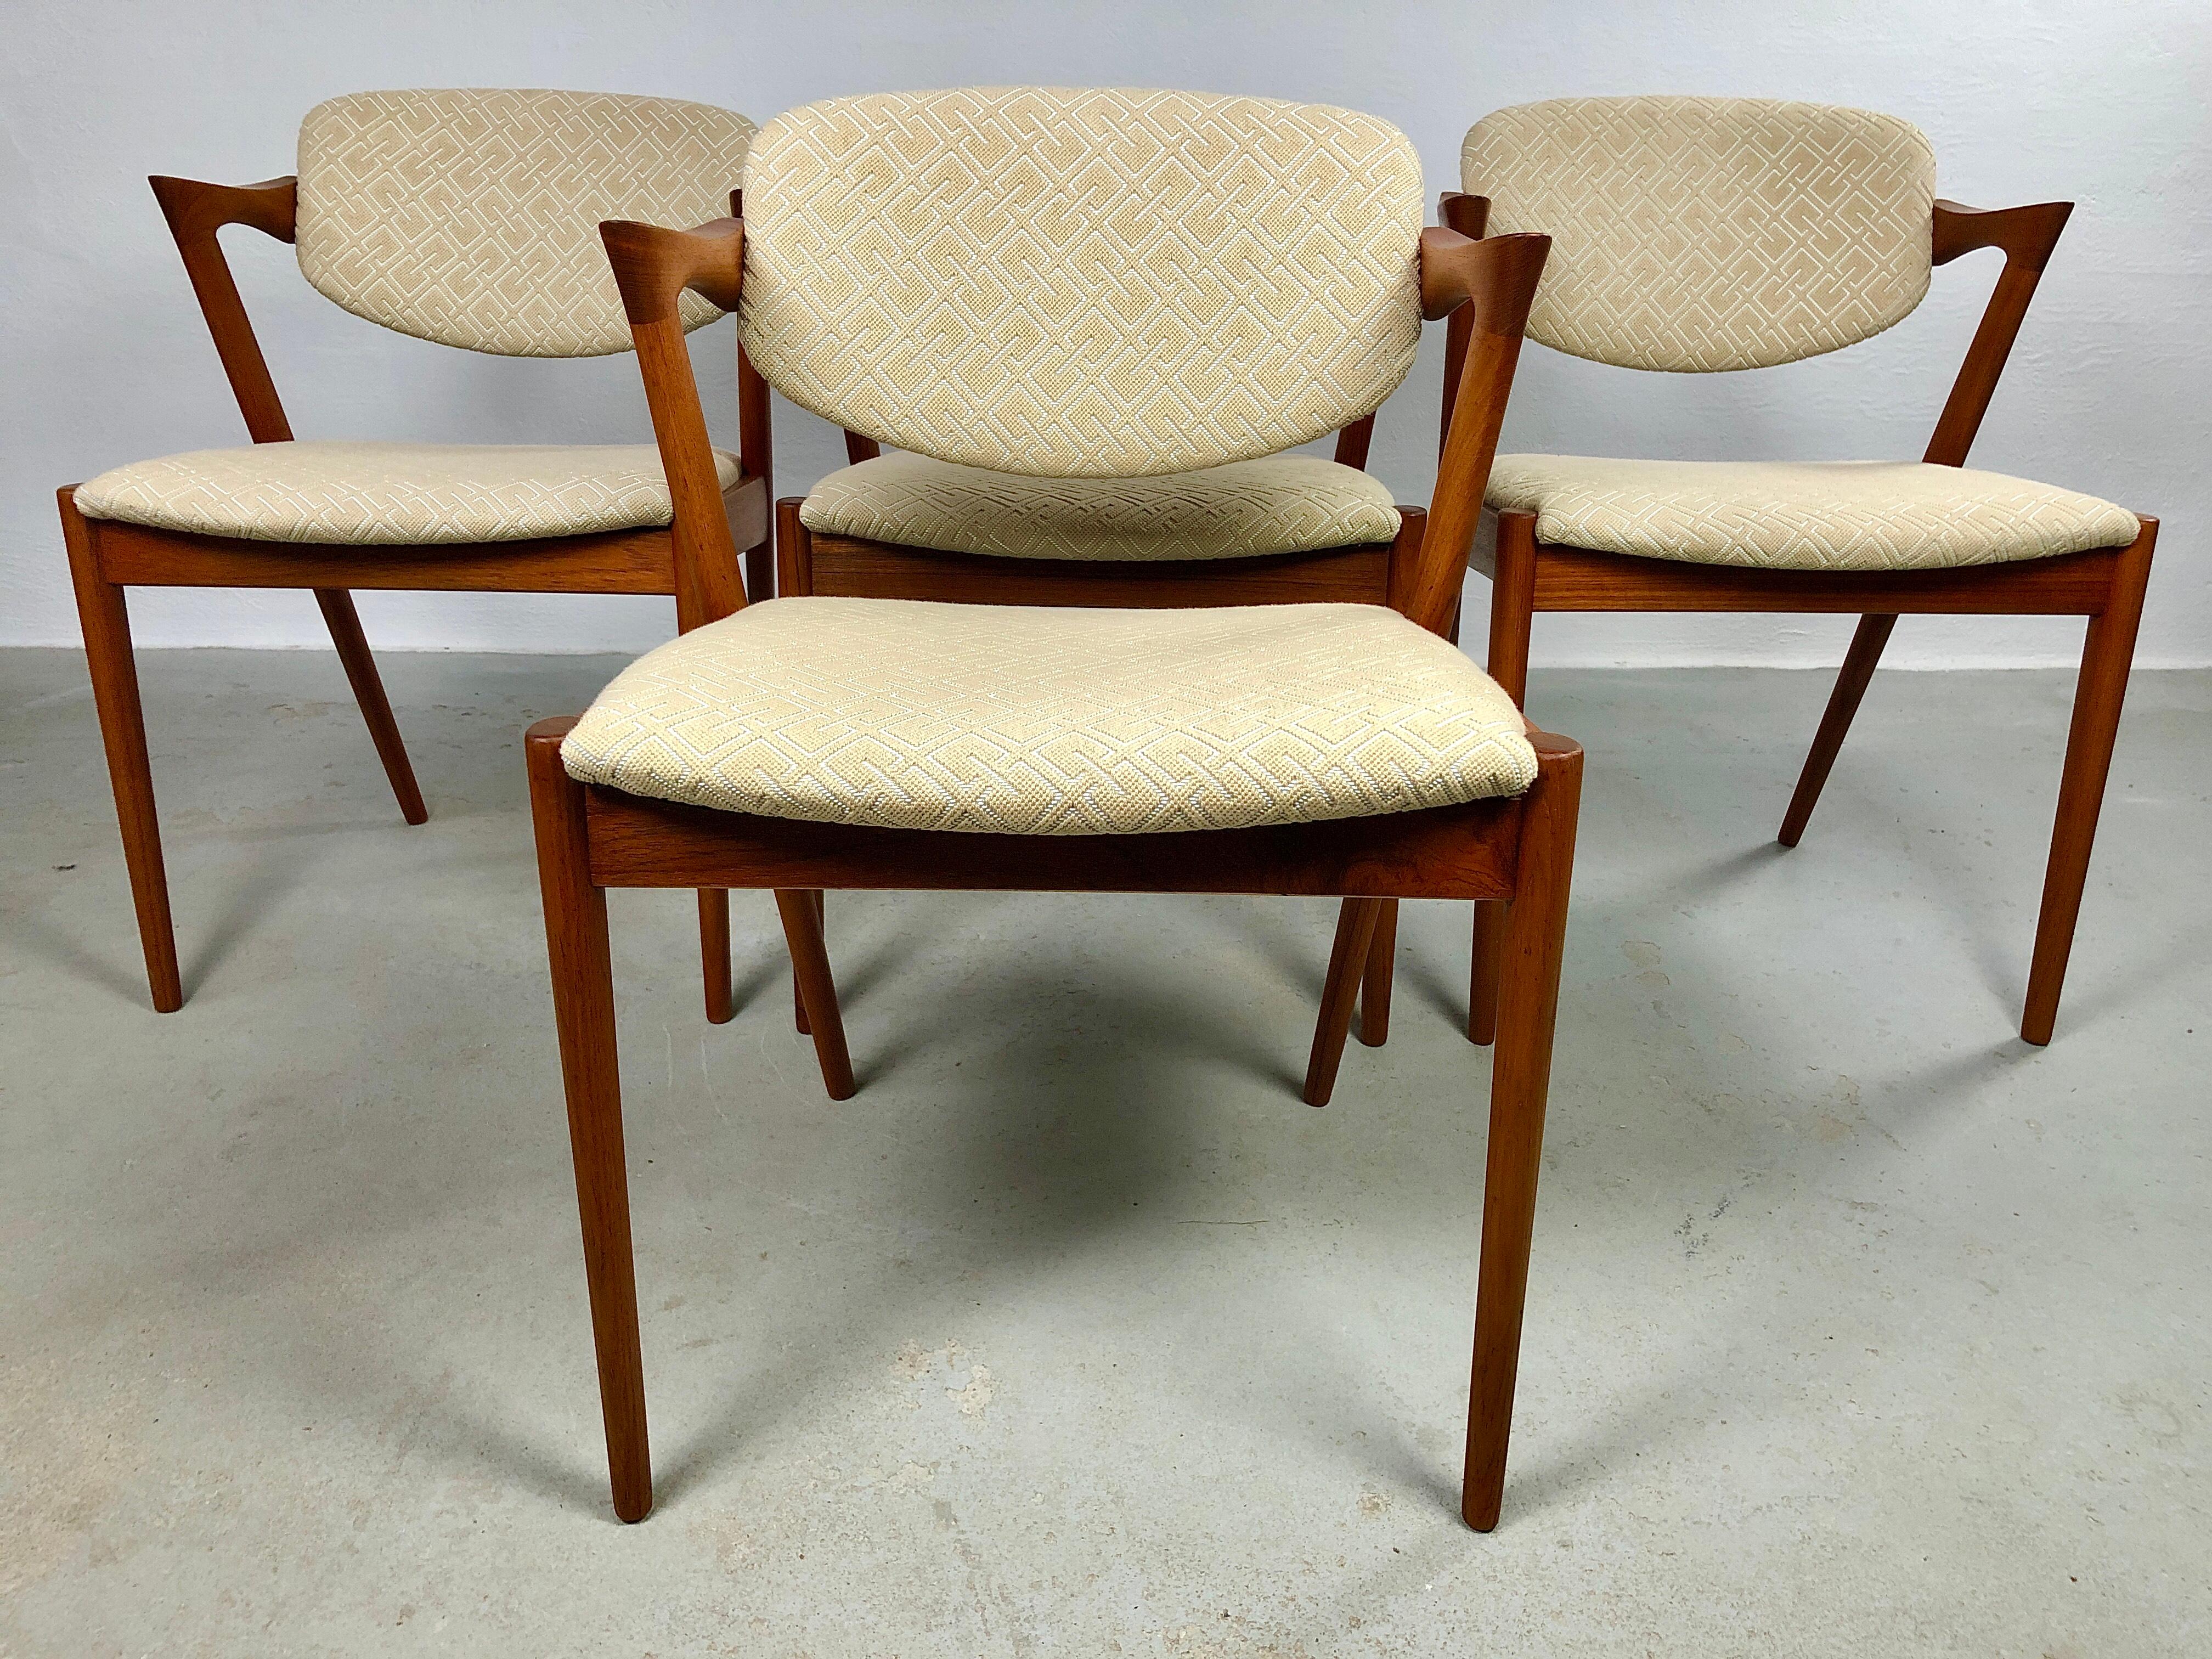 Set of 4 model 42 teak dining chairs with swivel backrest by Kai Kristiansen for Schous Møbelfabrik.

The chairs have Kai Kristiansens typical light and elegant yet daring design that make them fit in easily where you want them in your home - a